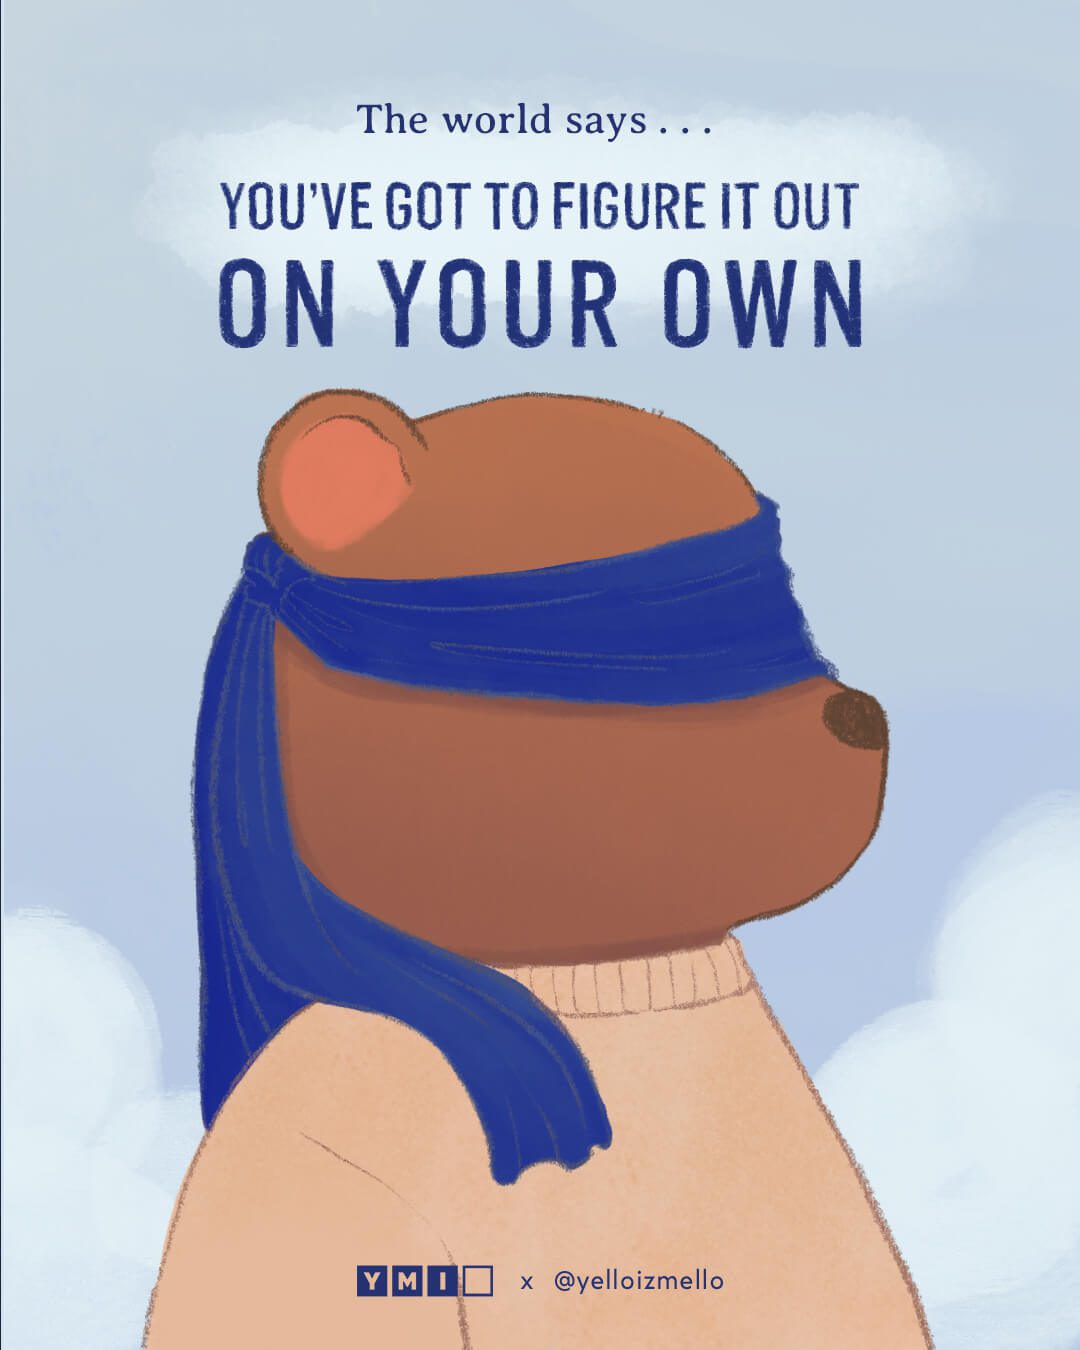 the bear's eyes is being cover by a blue clothes